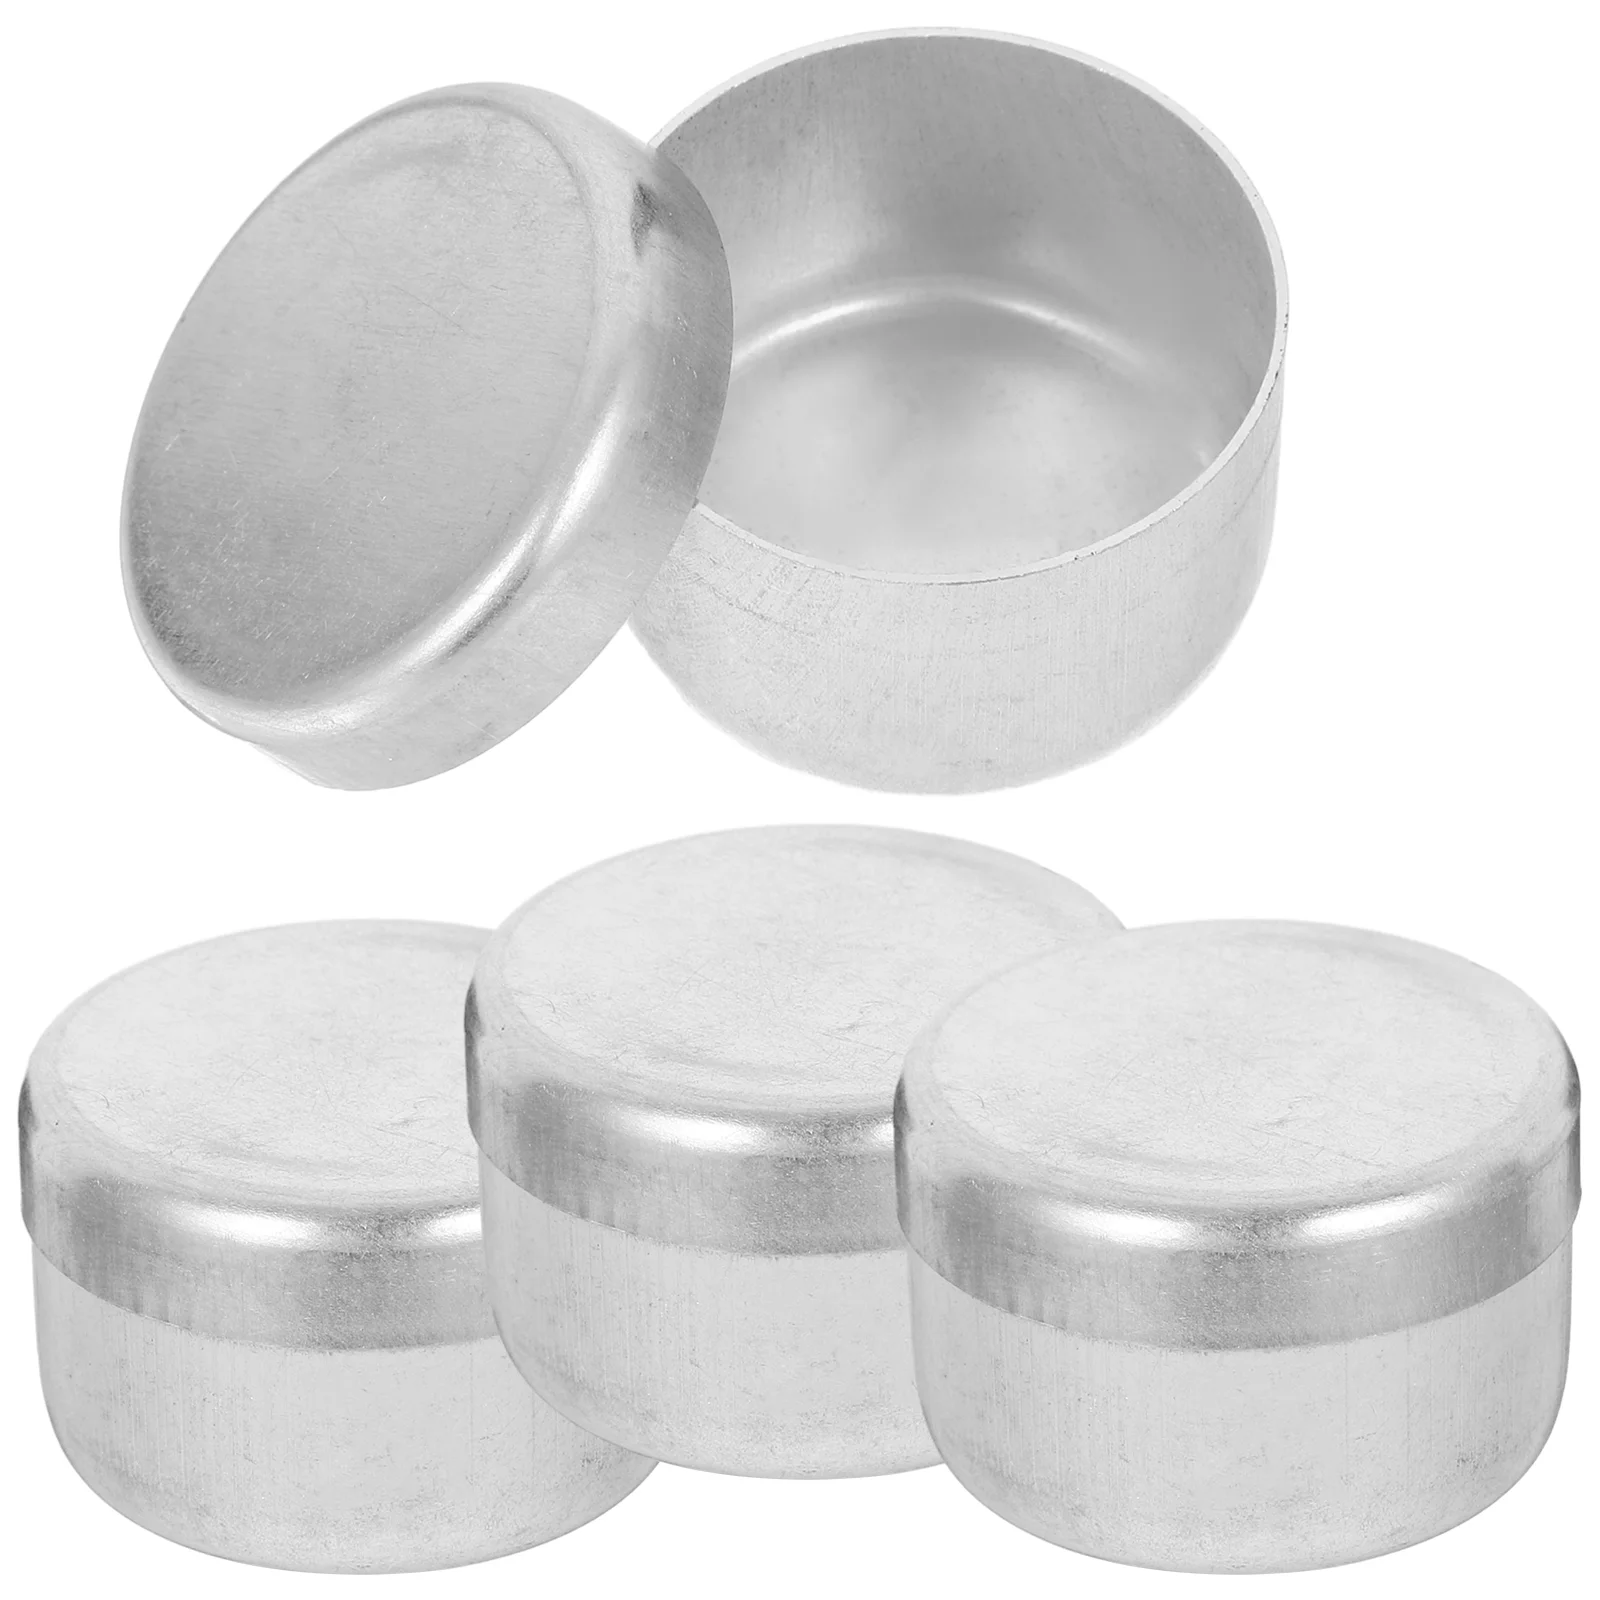 

4 Pcs Soil Sampling Box Weighing Jars Empty Aluminum Metal Storage Sample Containers Tiny Boxes Mini with Lids